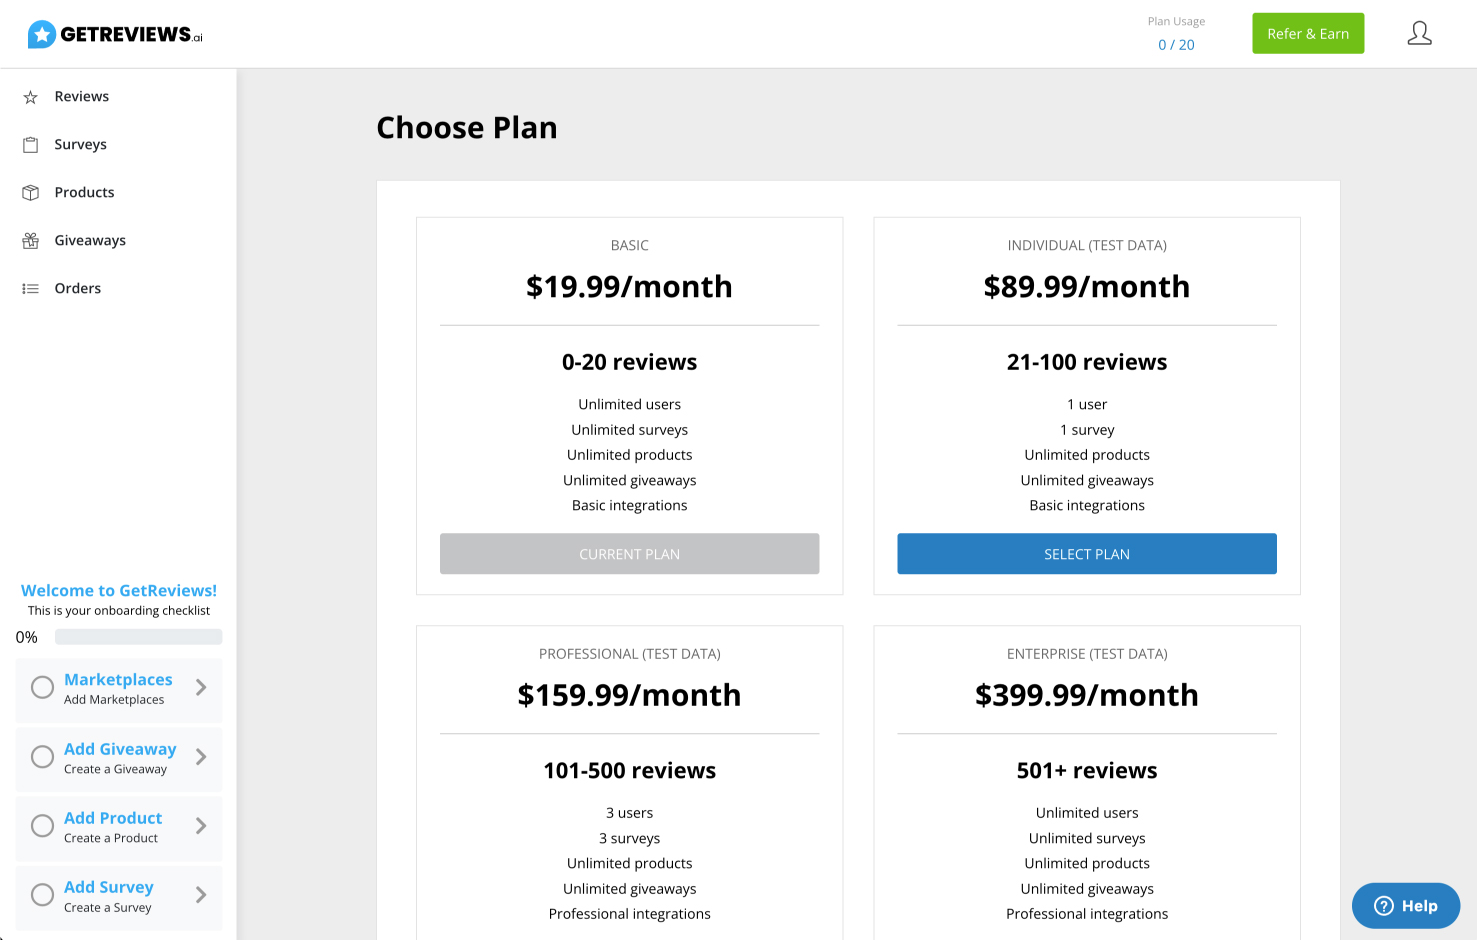 Click the "Select Plan" button on whichever plan you would like to upgrade or downgrade to.